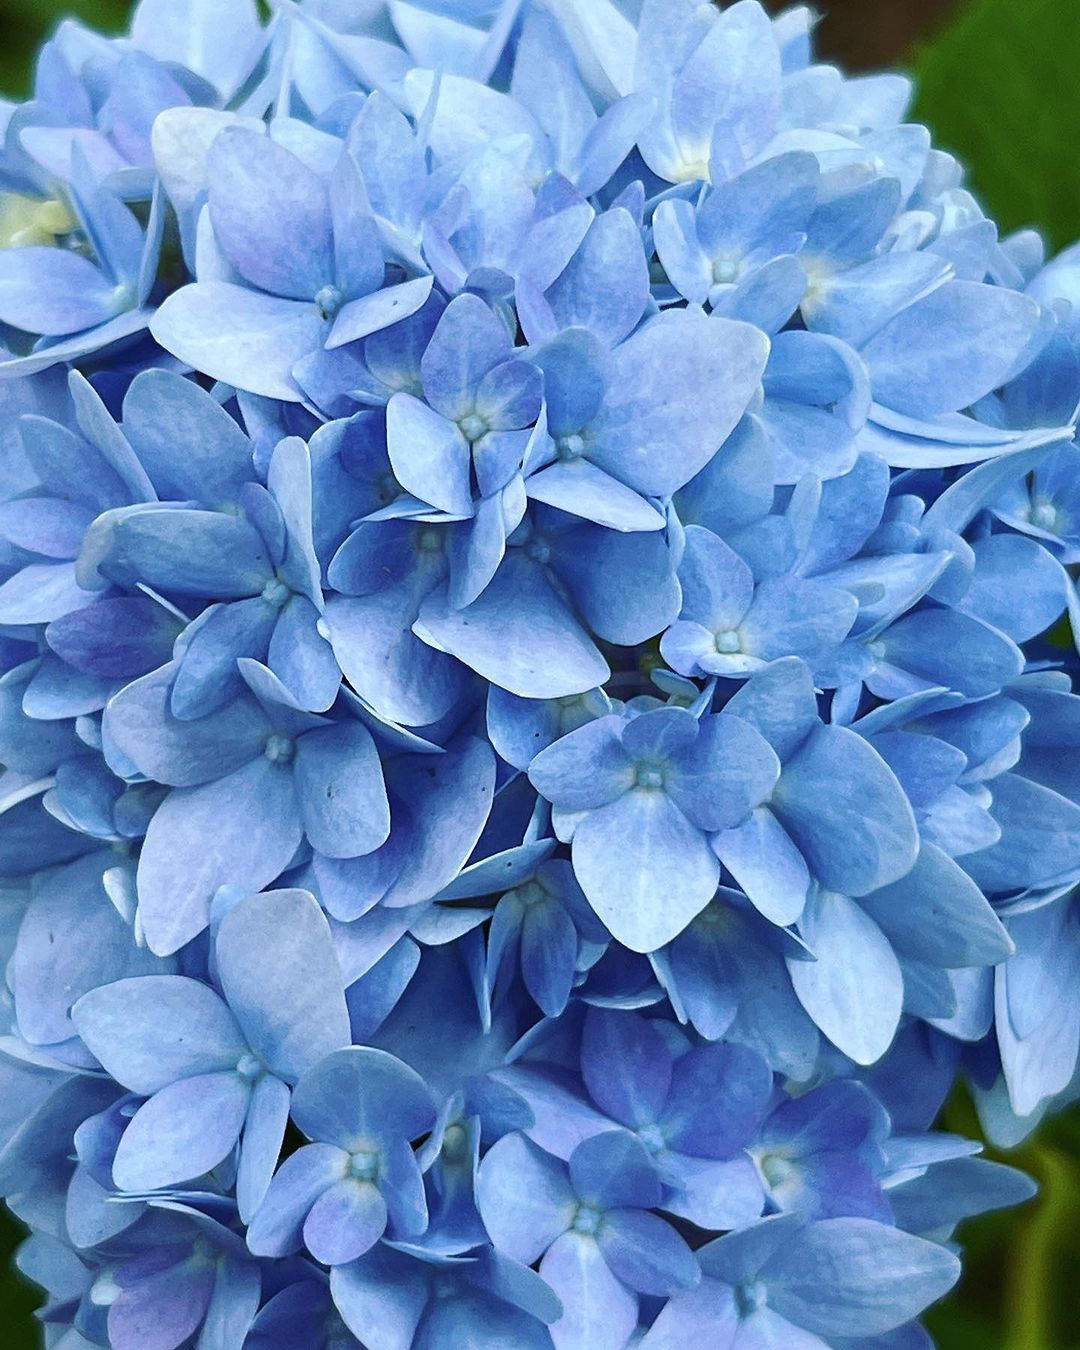  Detailed view of a blue Hydrangea blossom surrounded by lush green leaves.